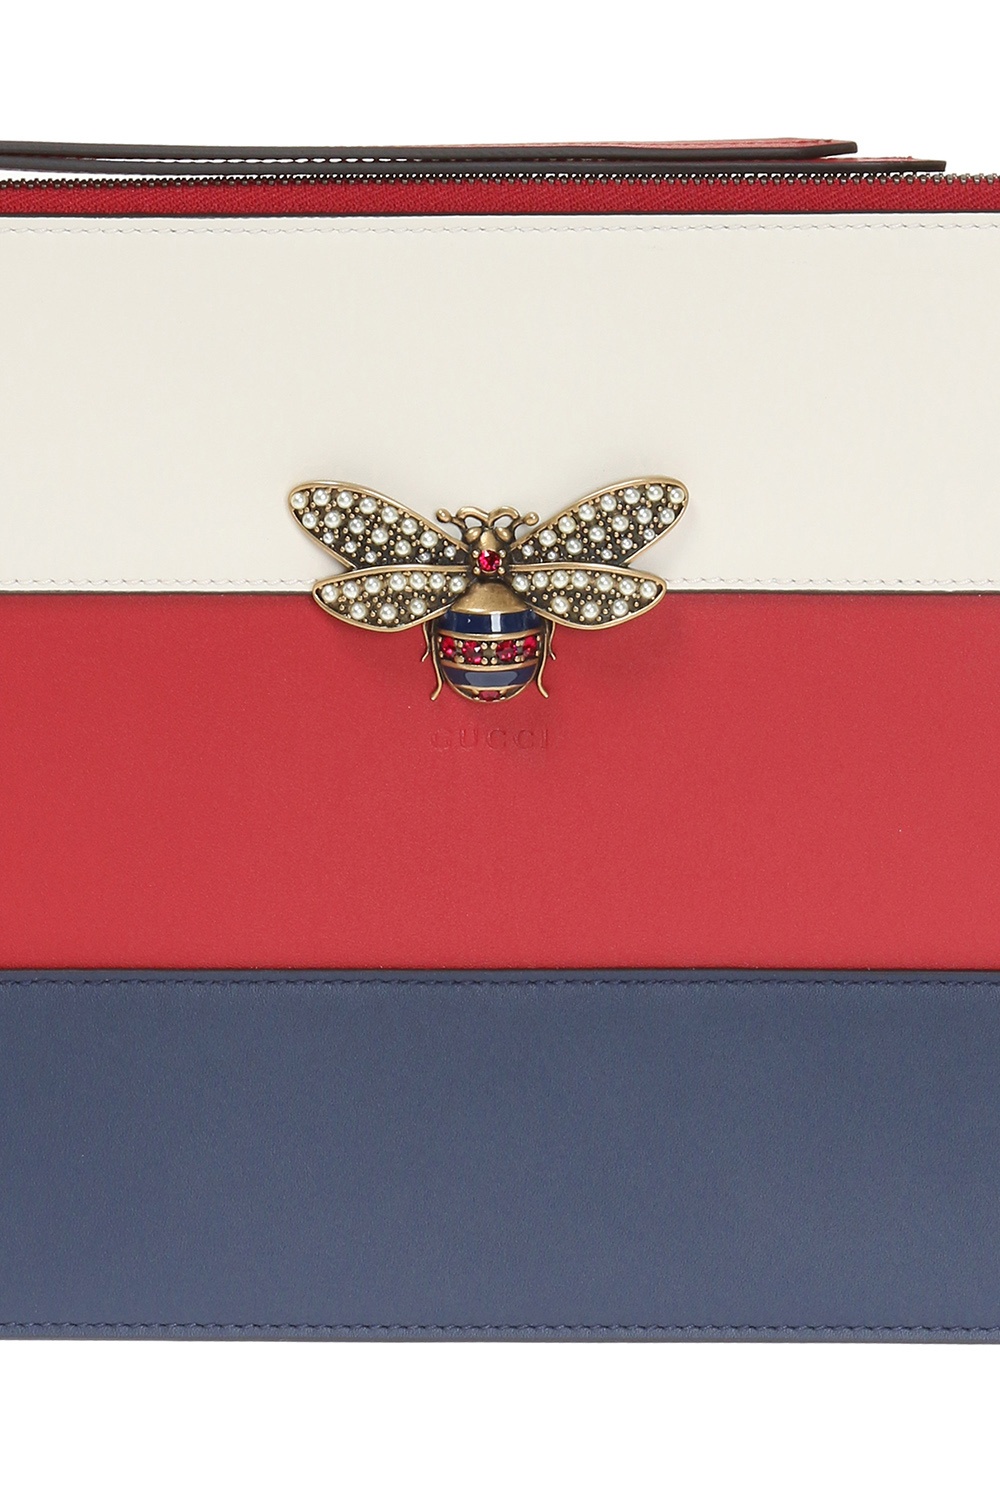 gucci clutch with bee